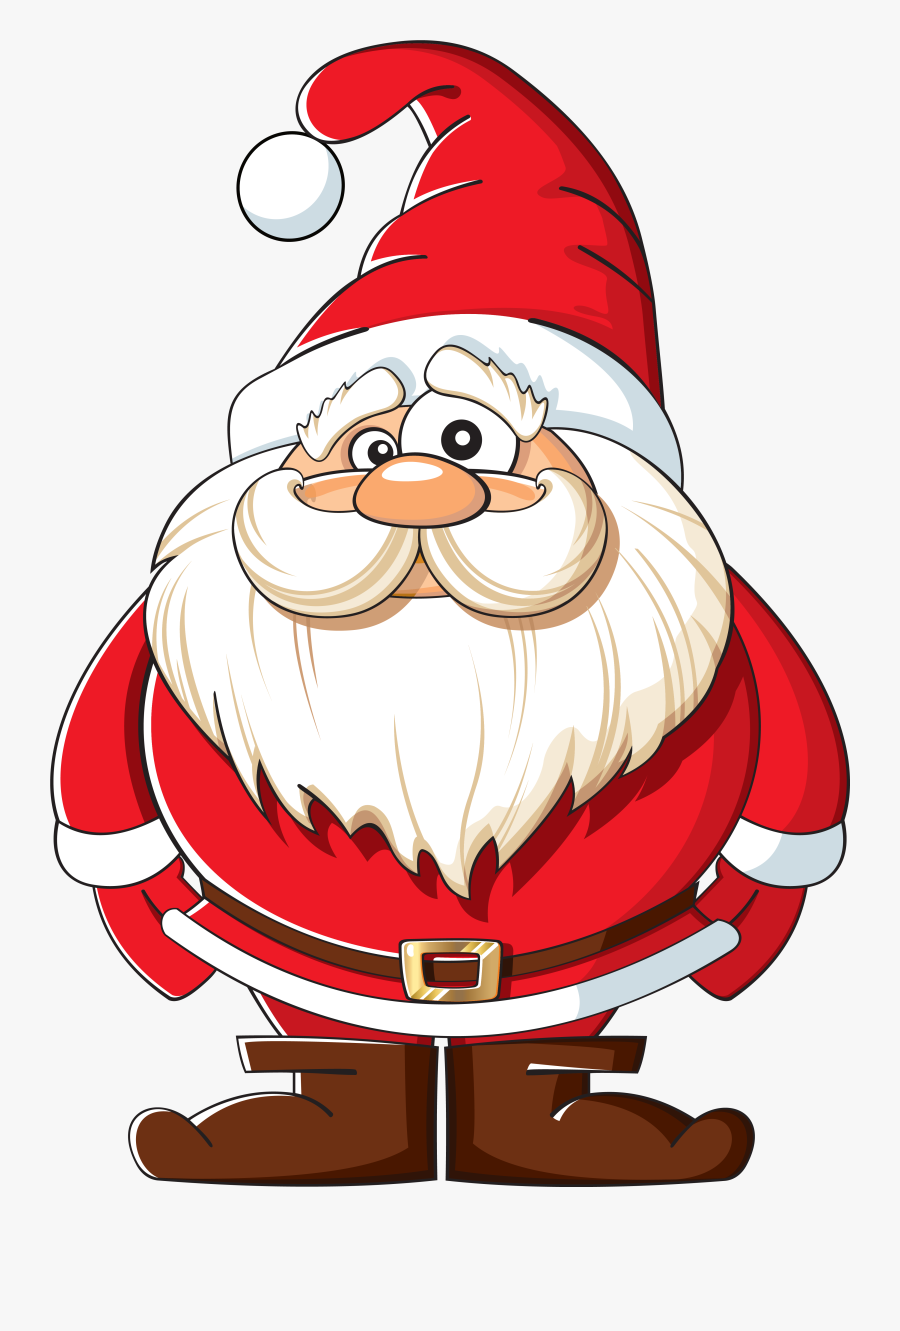 Merry Christmas Stickers Free Download, Transparent Clipart